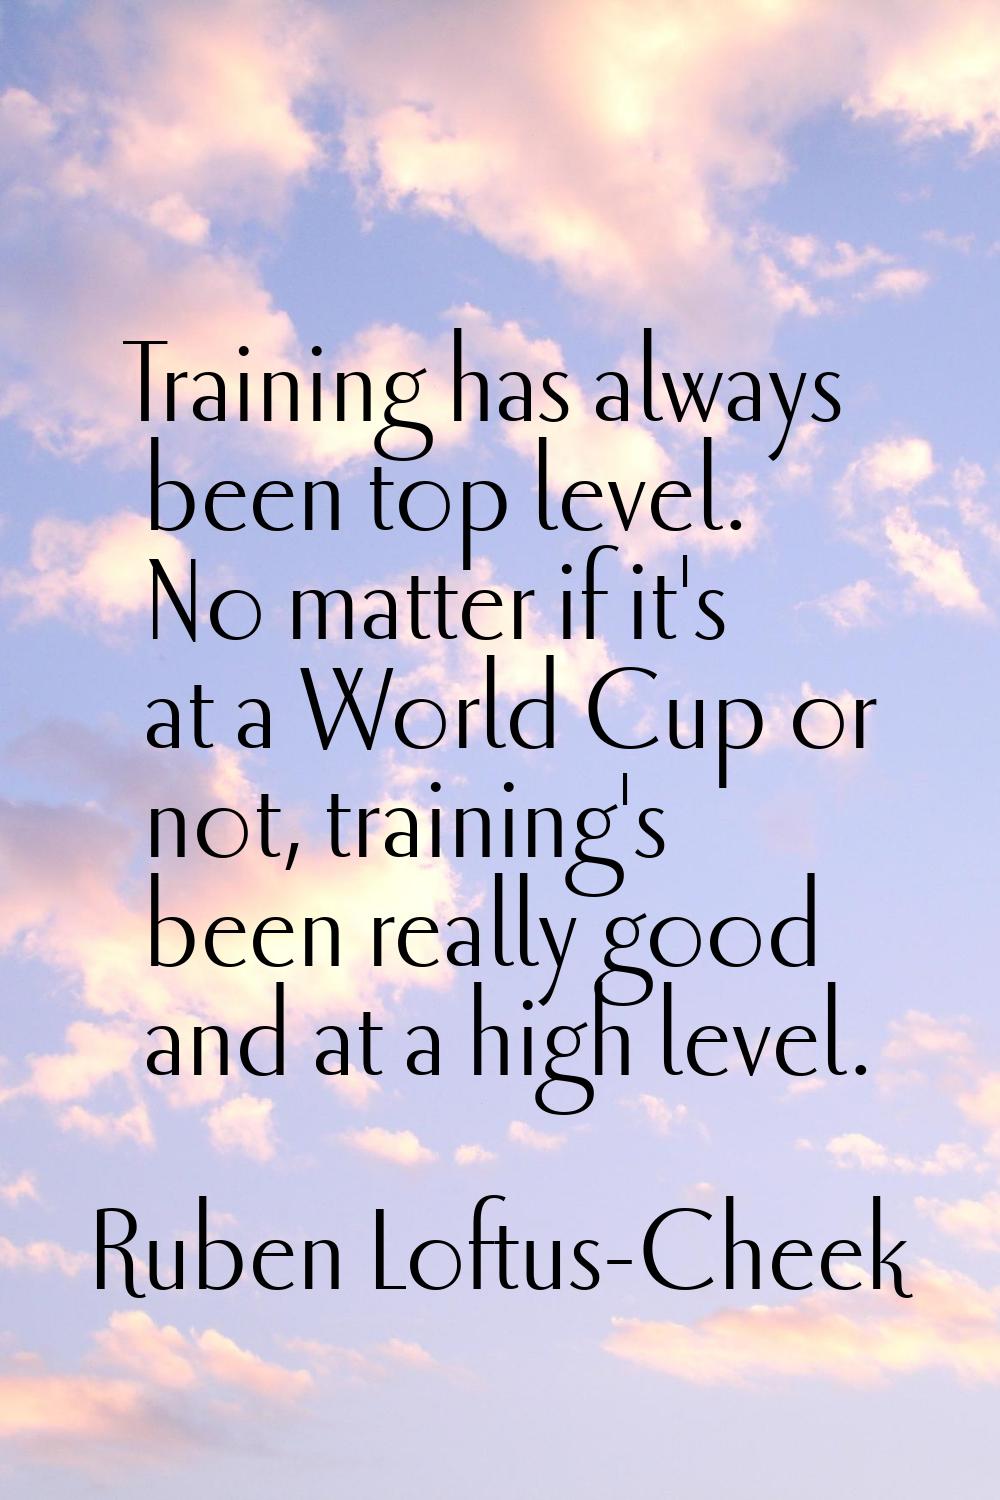 Training has always been top level. No matter if it's at a World Cup or not, training's been really